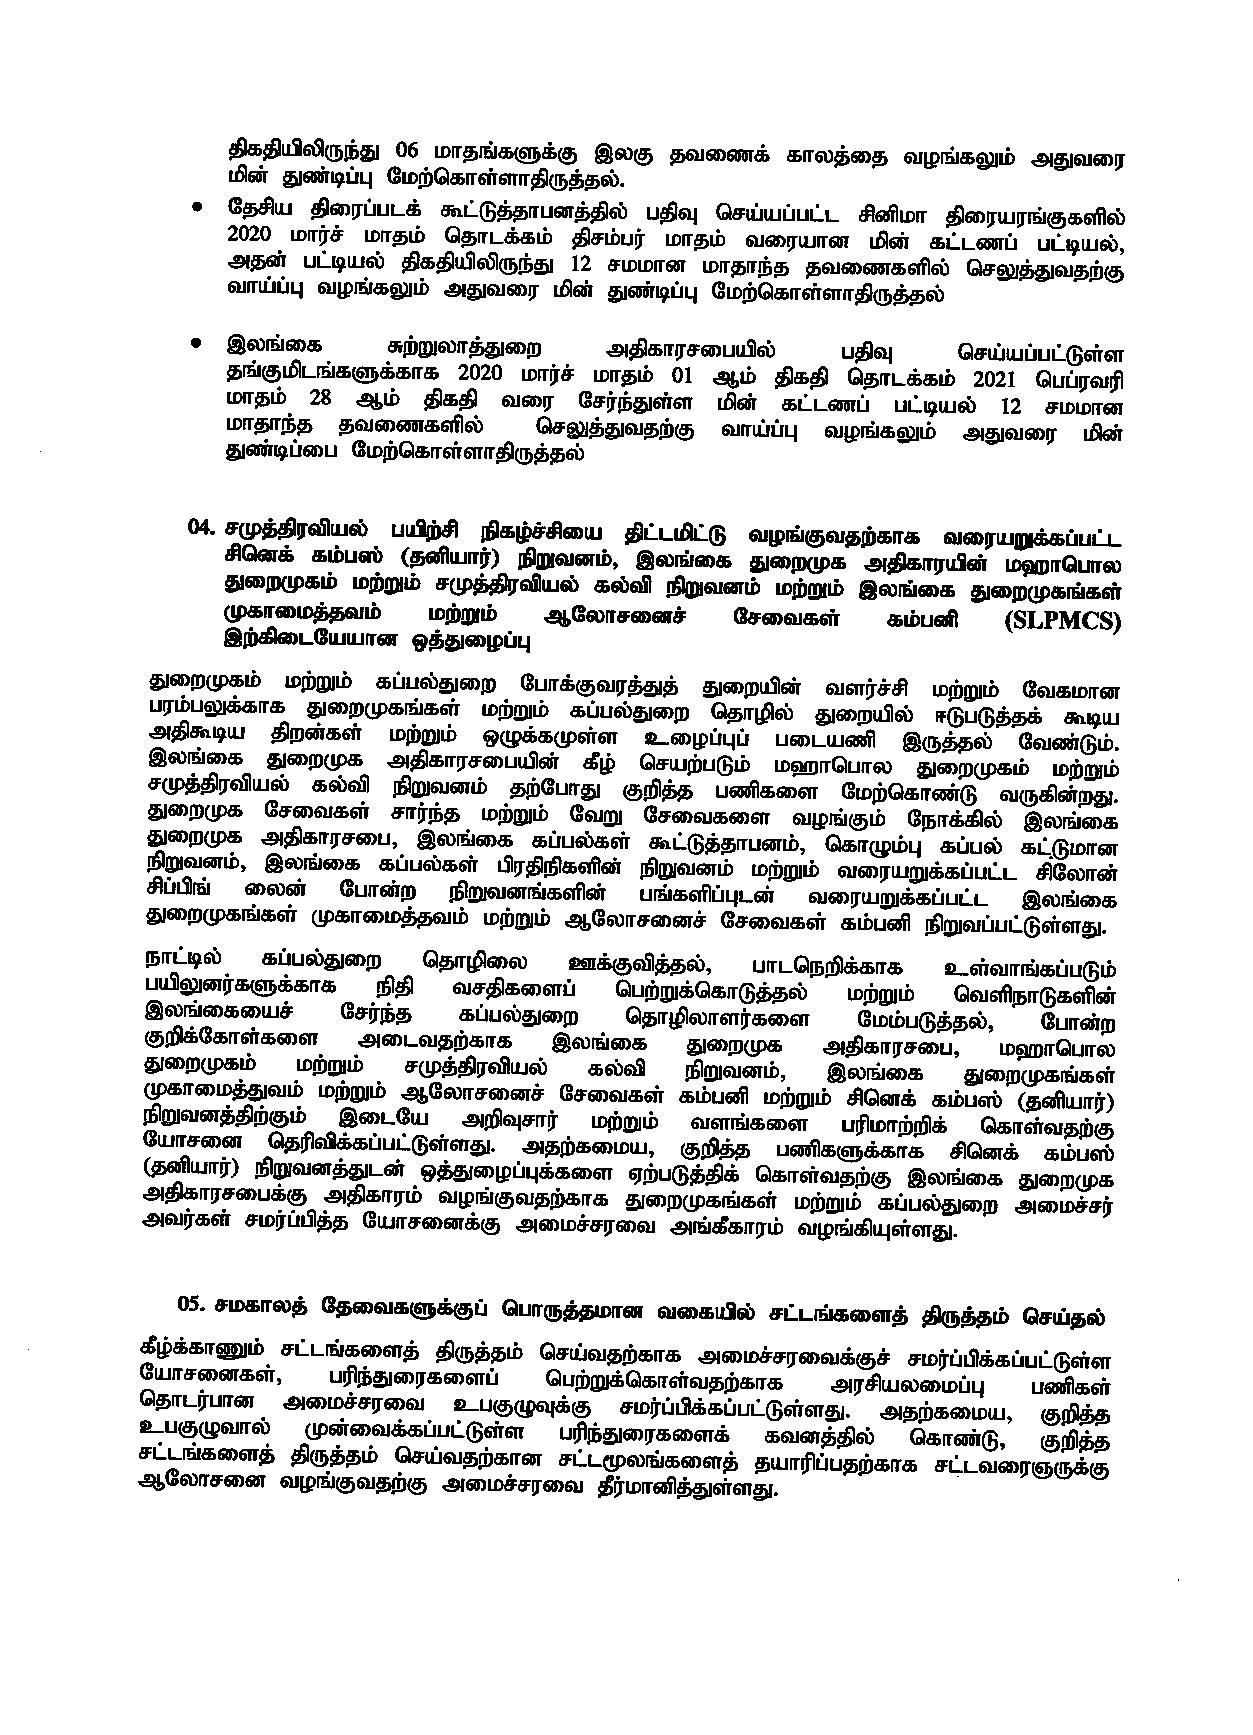 Decision on 18.01.2021 Tamil page 002